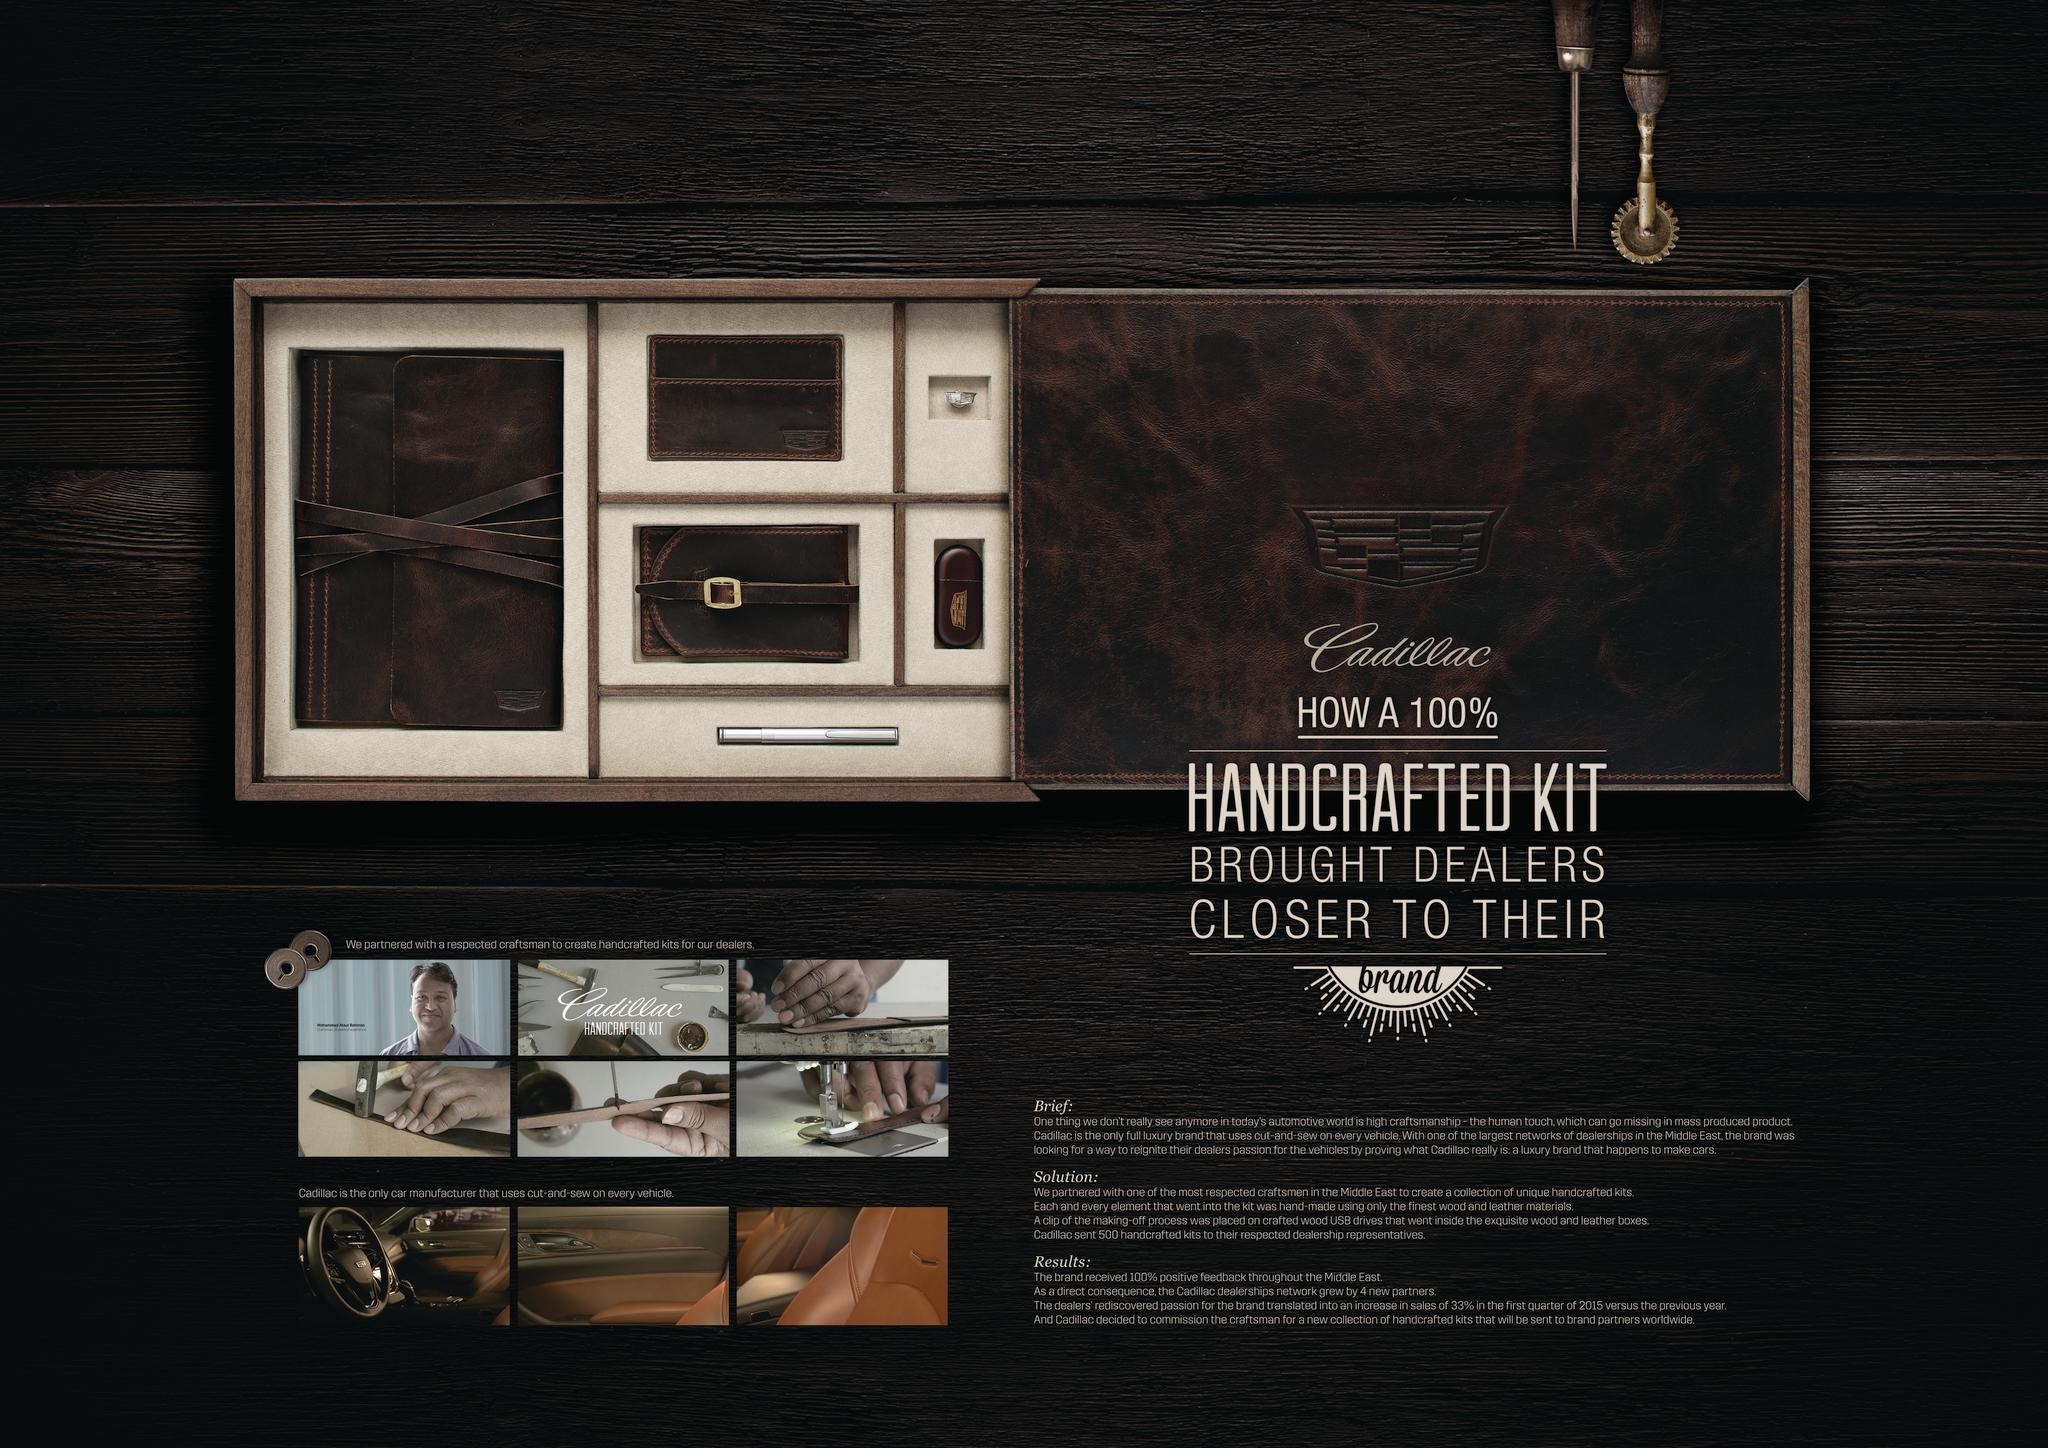 HANDCRAFTED KIT